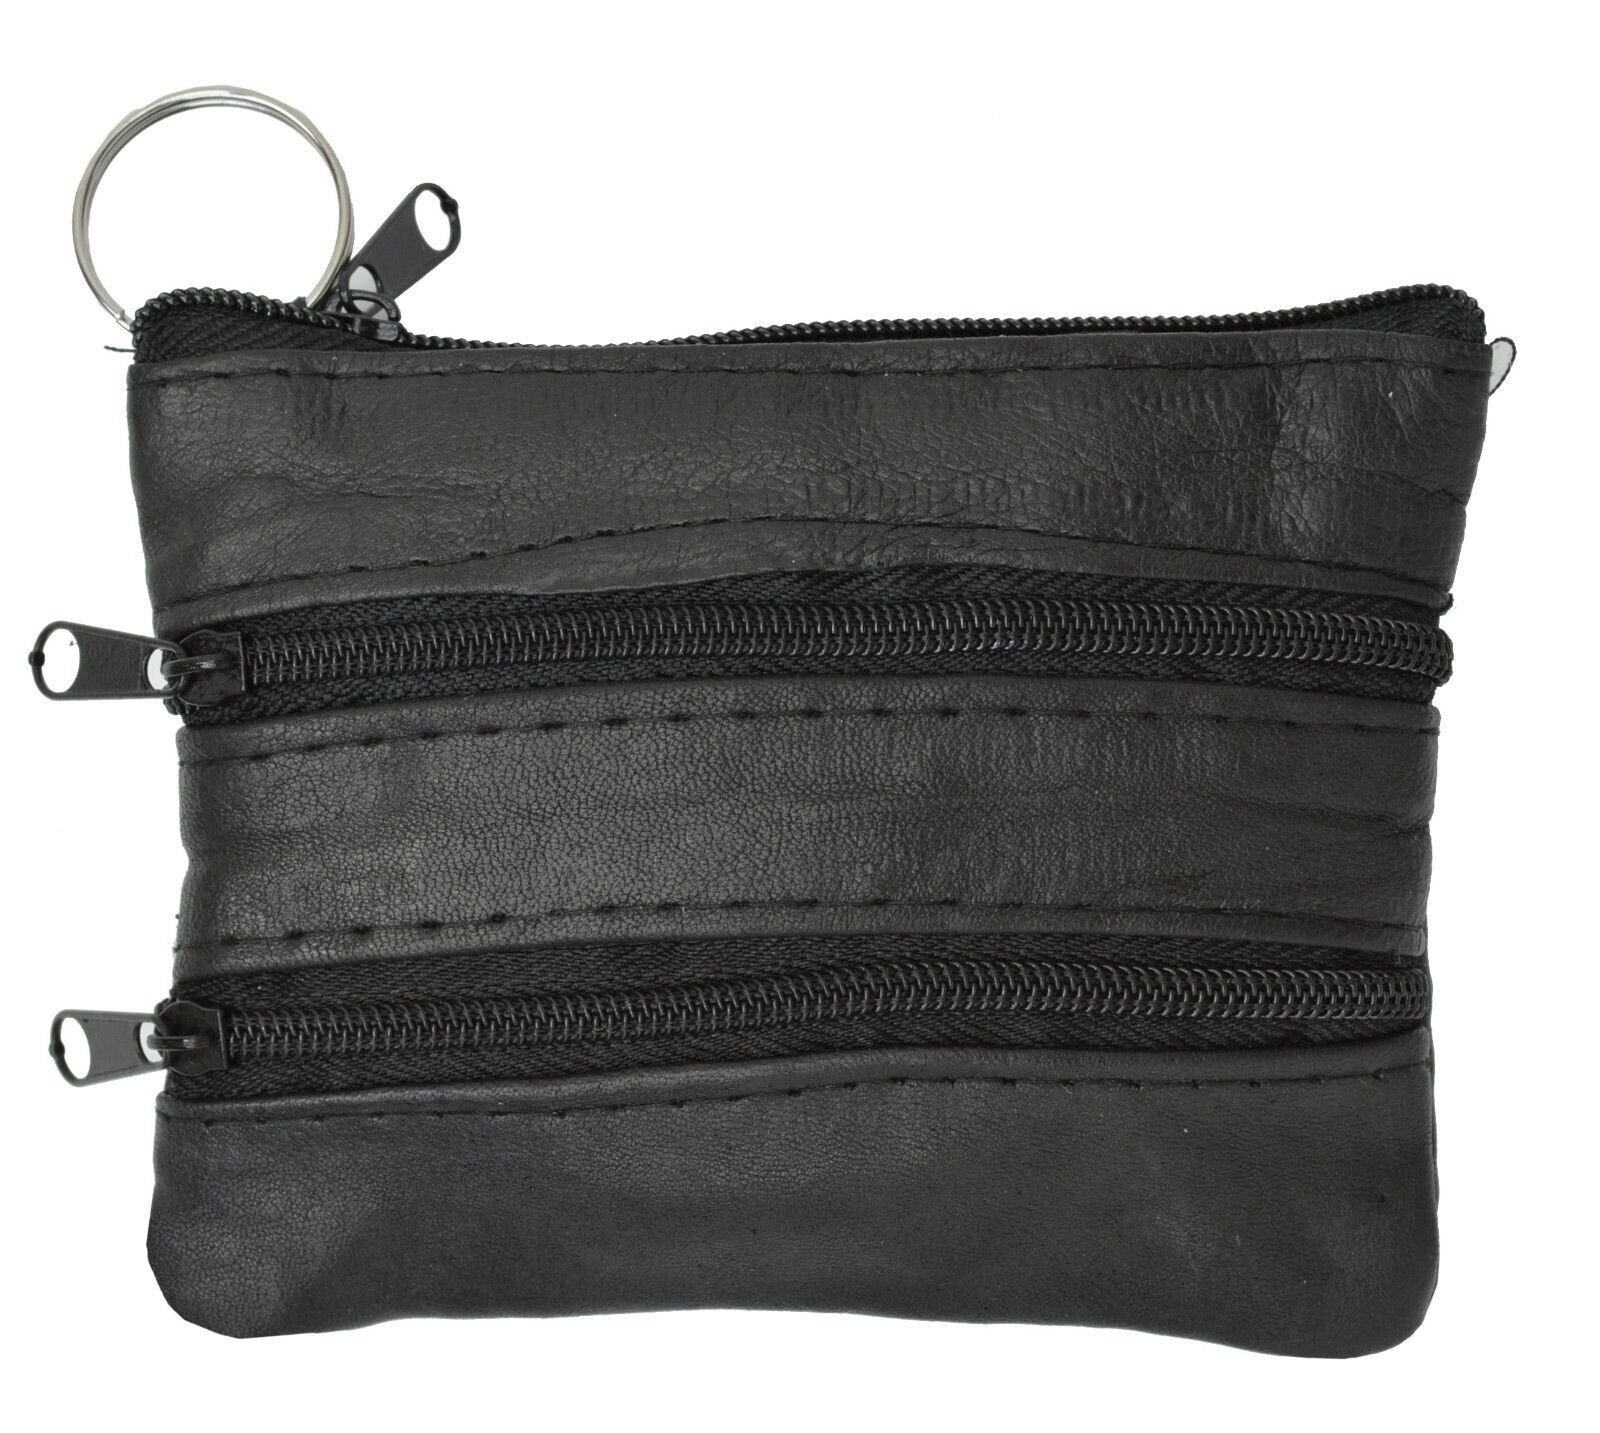 Black Leather Coin Purse / Mini Wallet / Key Pouch - 3 Zippered Sections